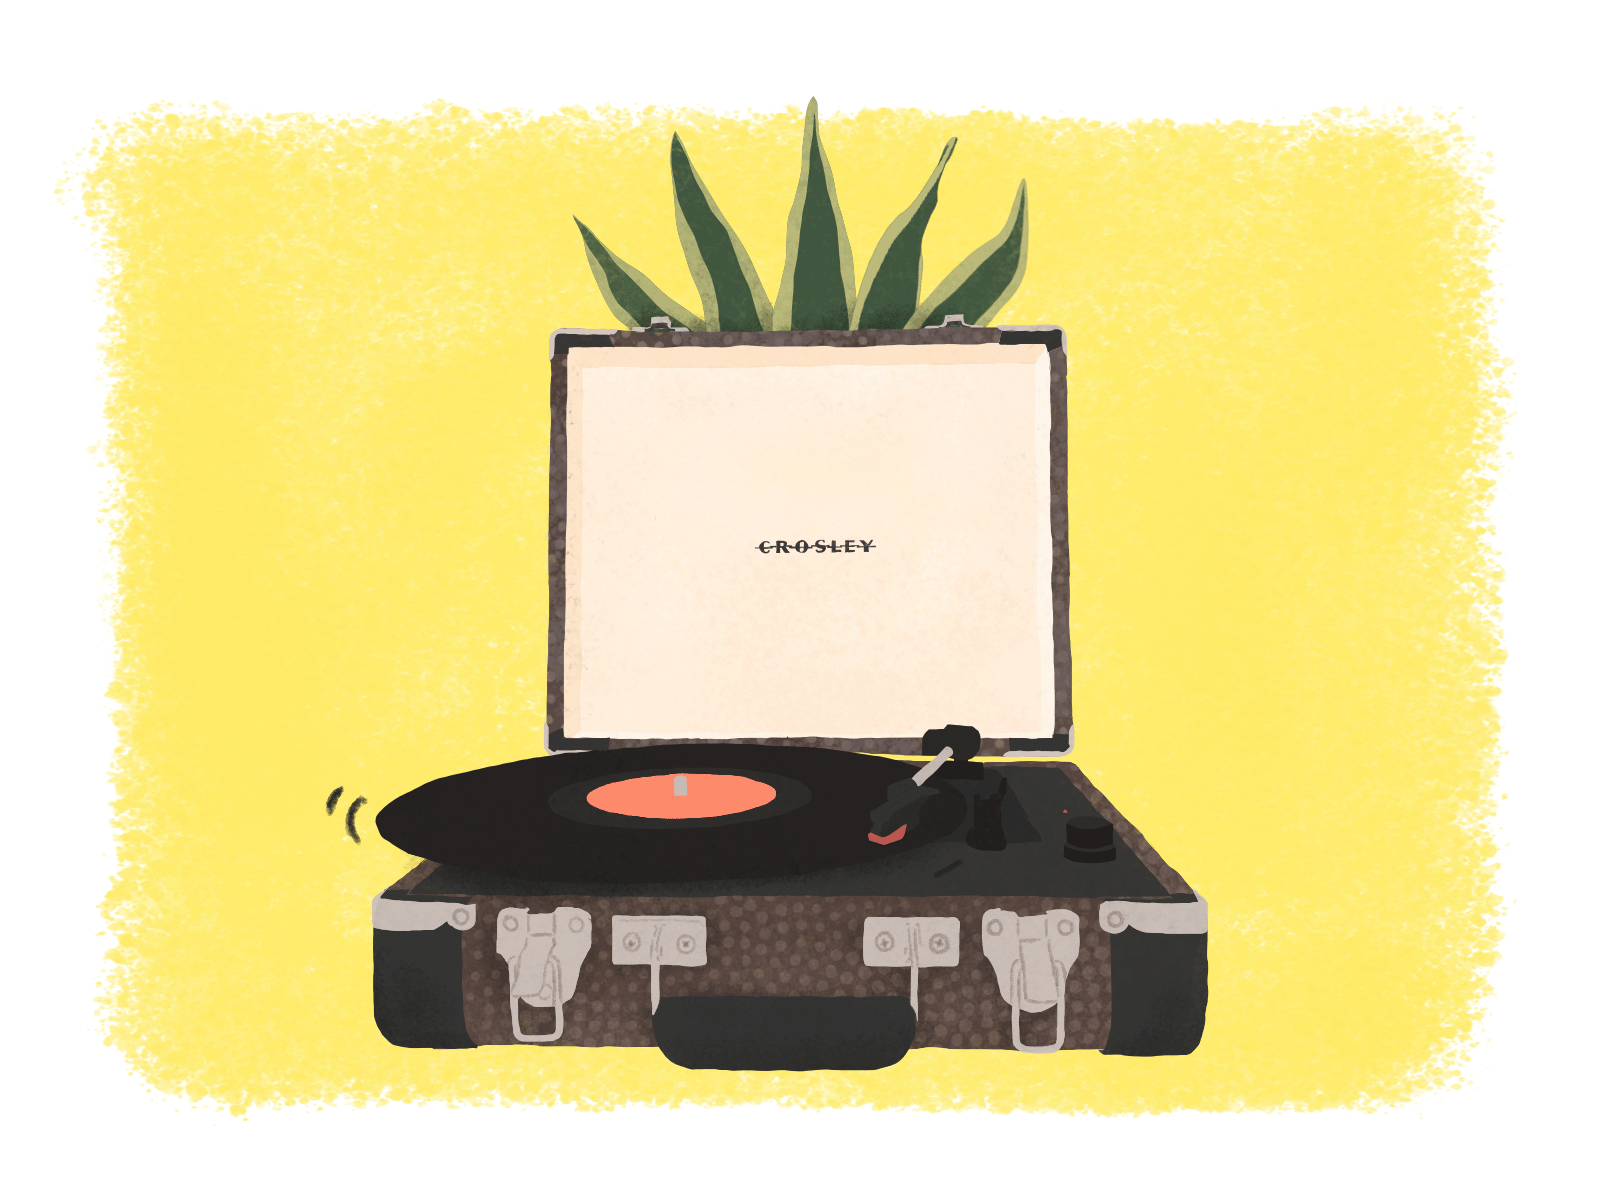 Crosley Playing Sweet Tunes animated gif animation animation 2d illustrated animation illustration music plant snake plant vinyl record